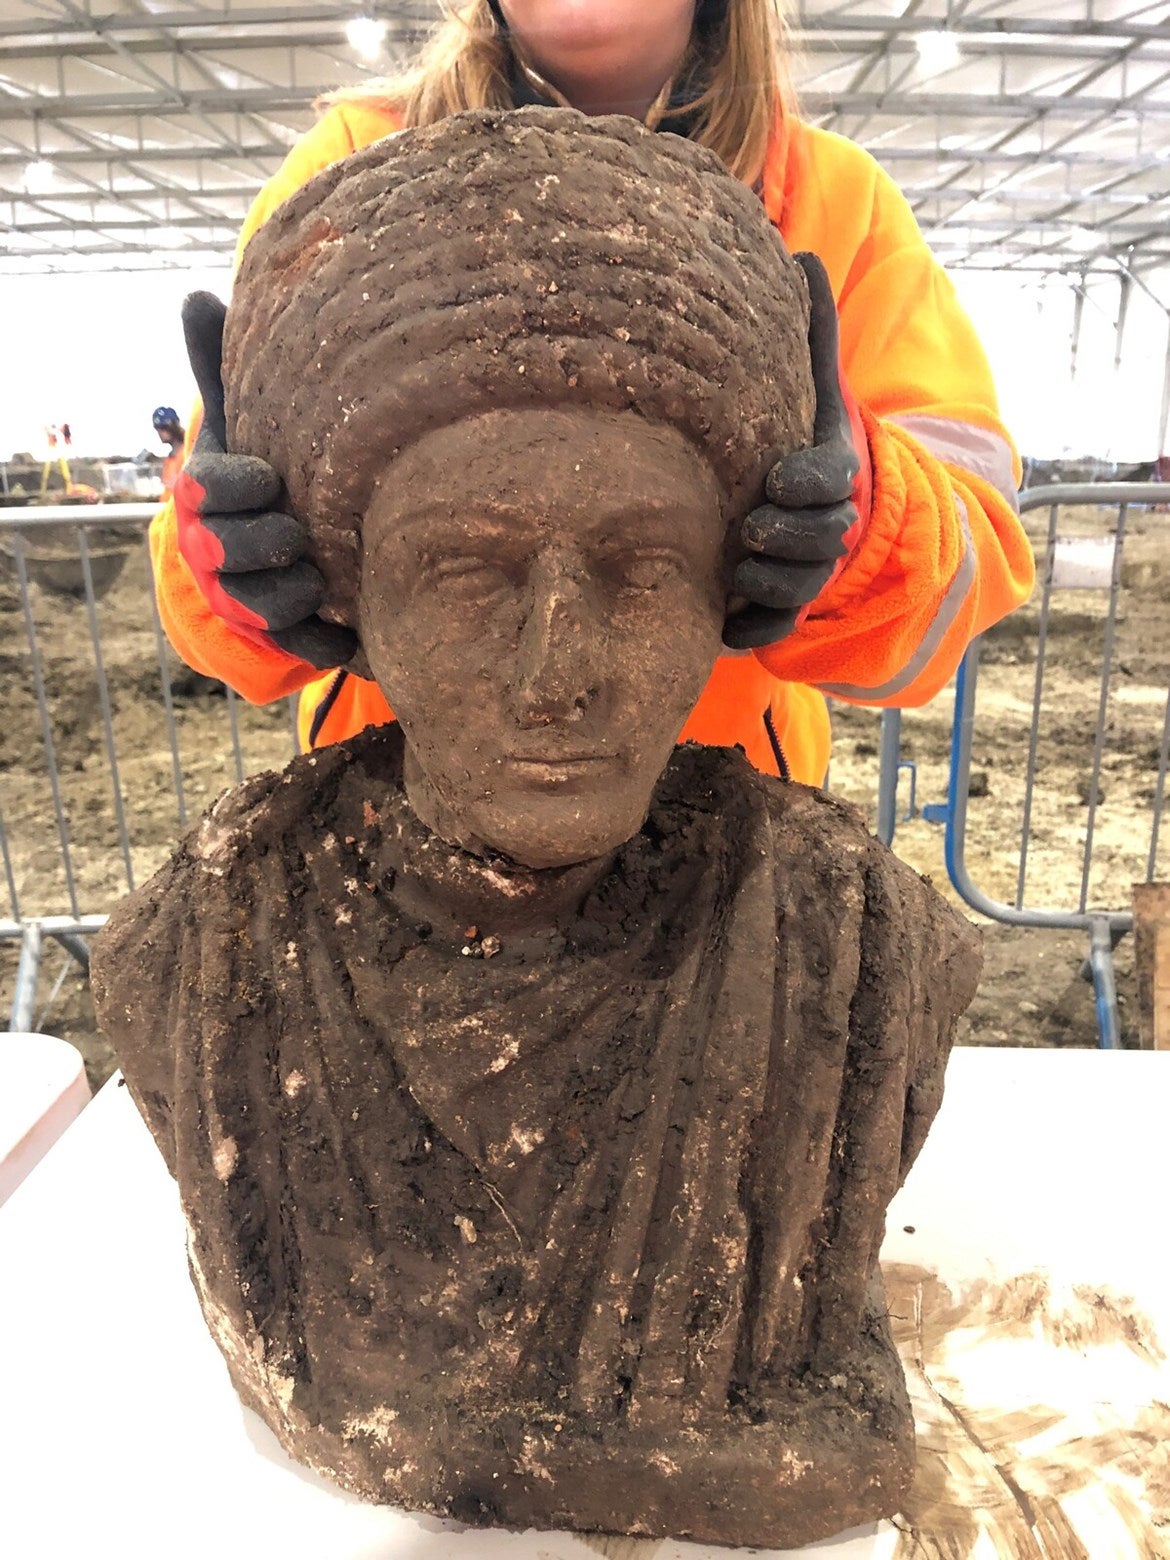 A Roman bust and torso, still caked in dirt.  (Image: HS2)